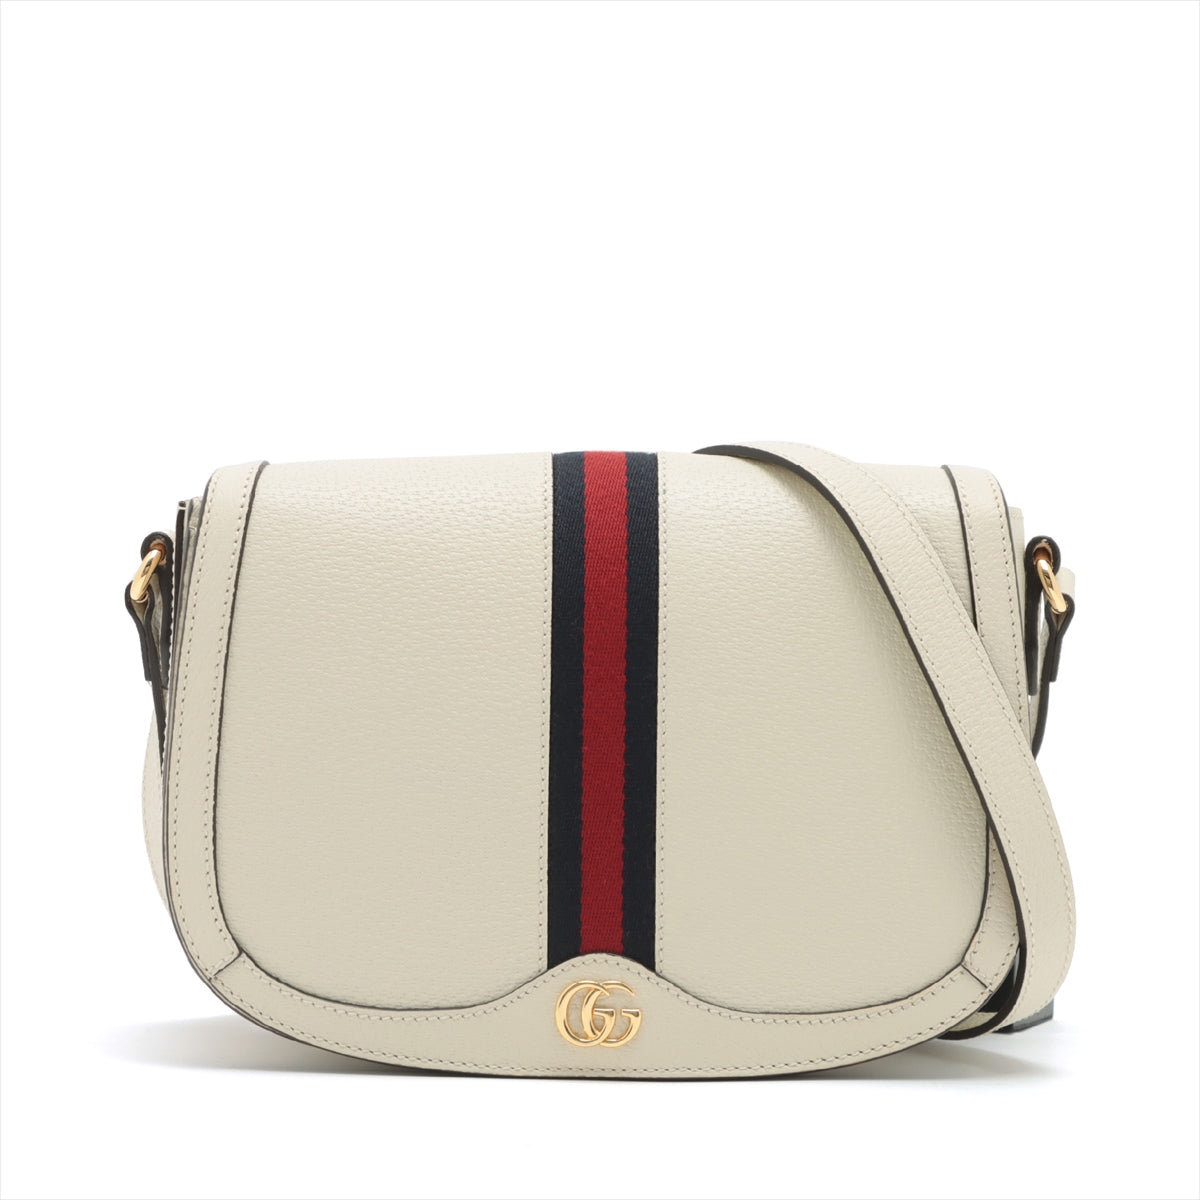 Gucci Ophidia Leather Shoulder bag White 601044